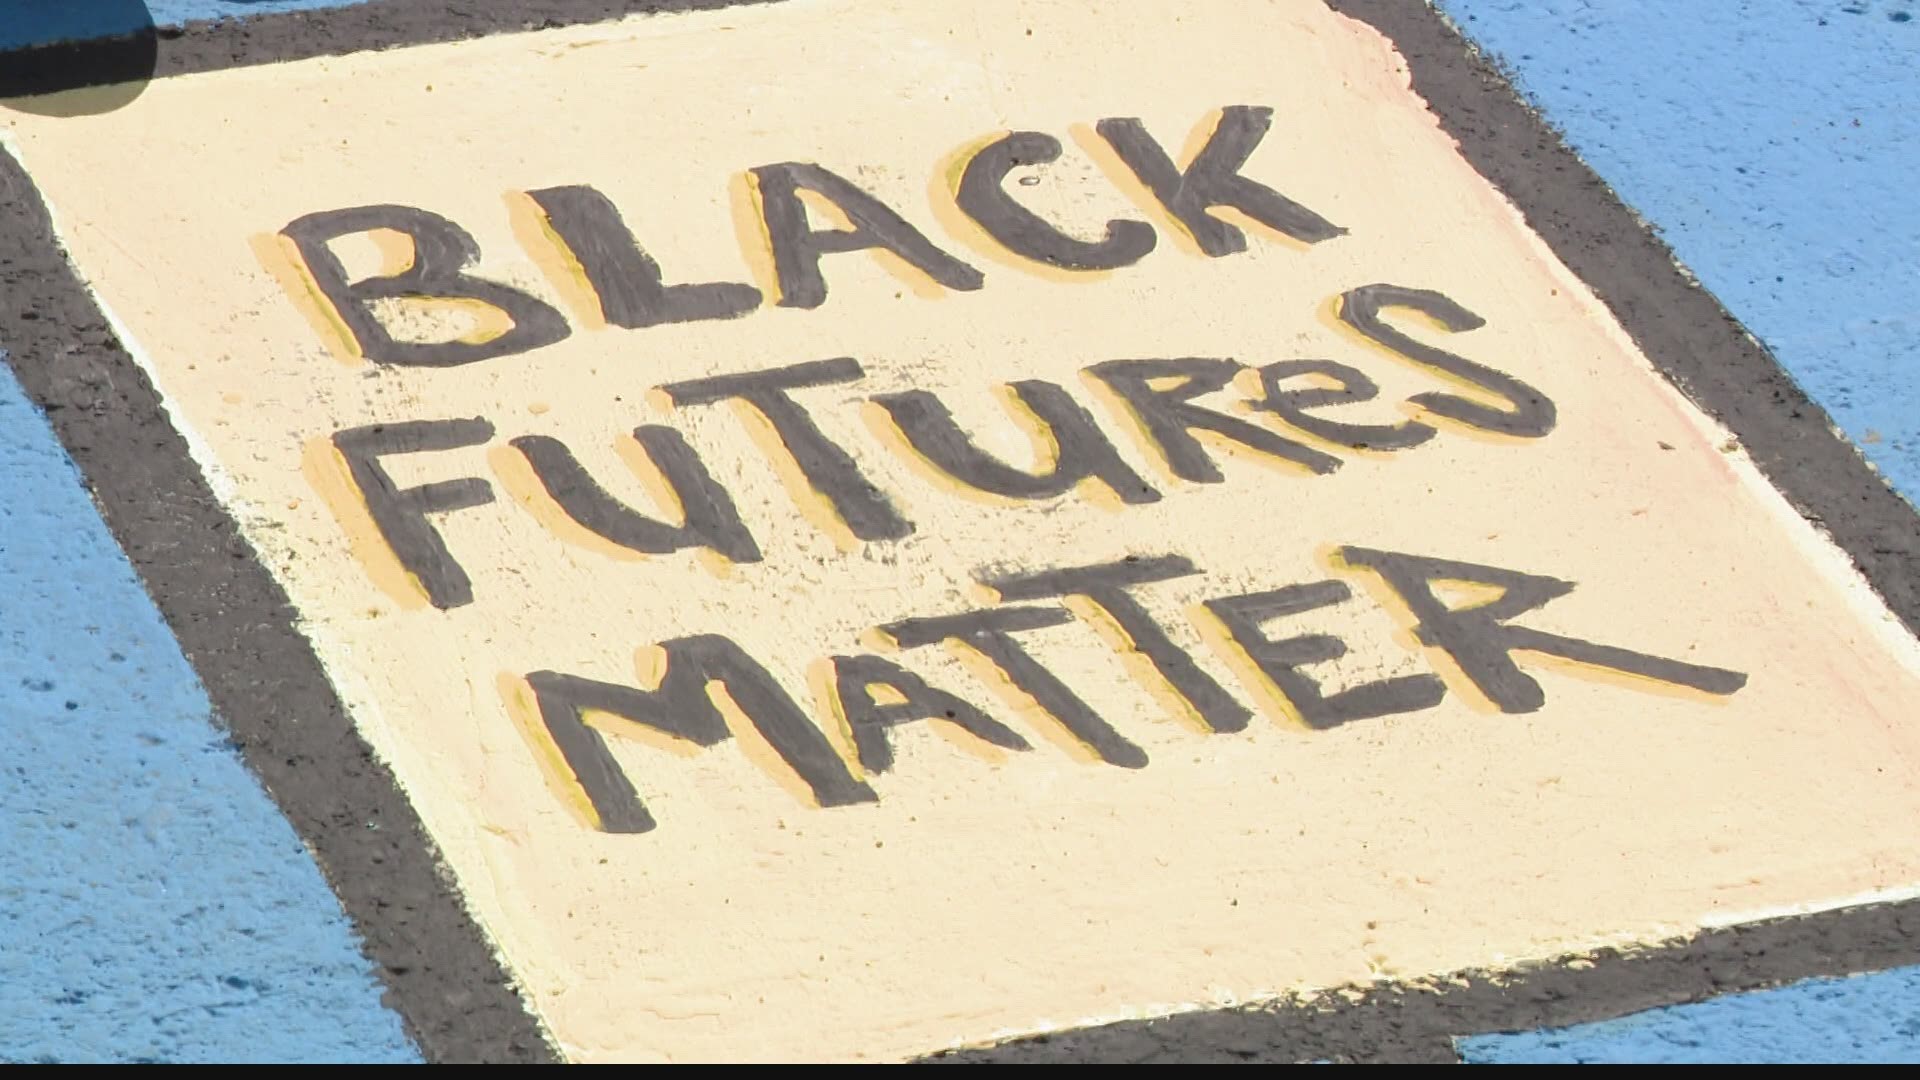 The Indianapolis Art Center is now displaying a new Black Lives Matter exhibit.